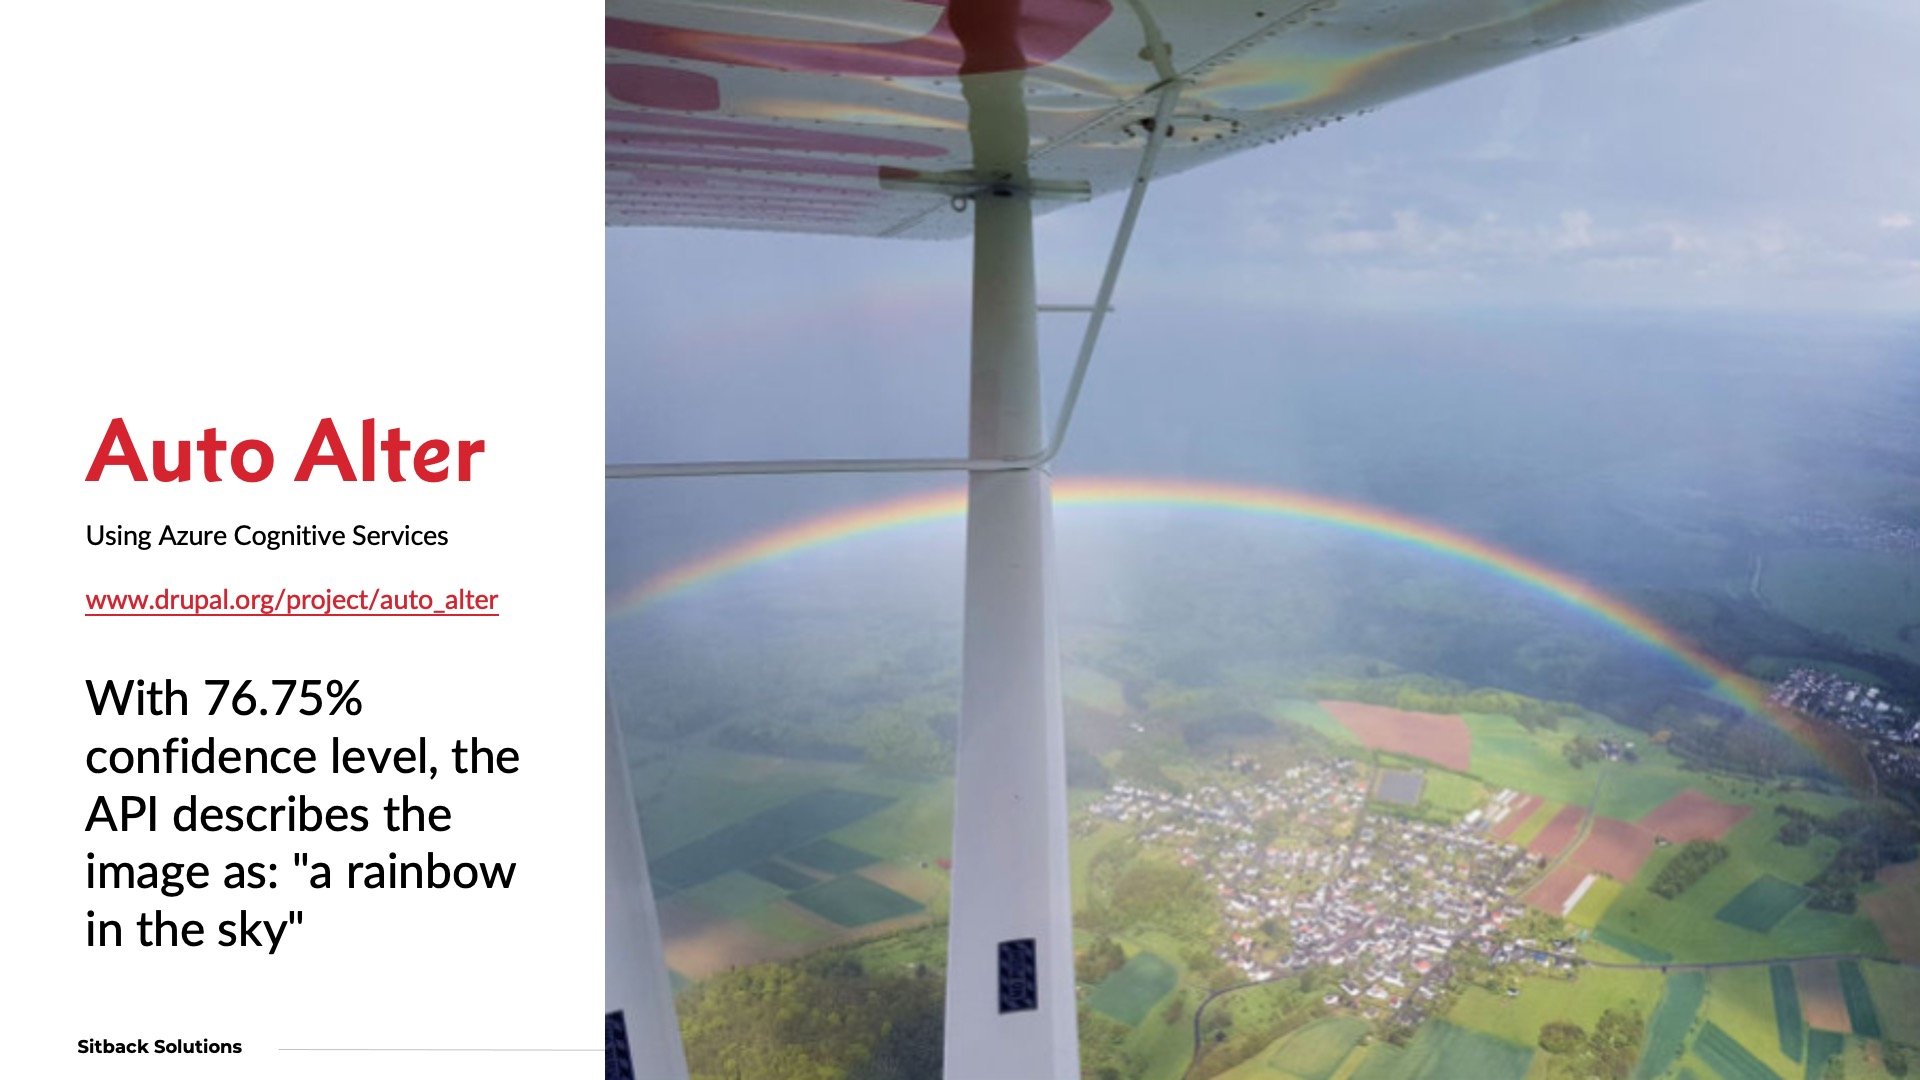 Auto Alter’s API describes the image below as ‘a rainbow in the sky’ with 76.75% confidence